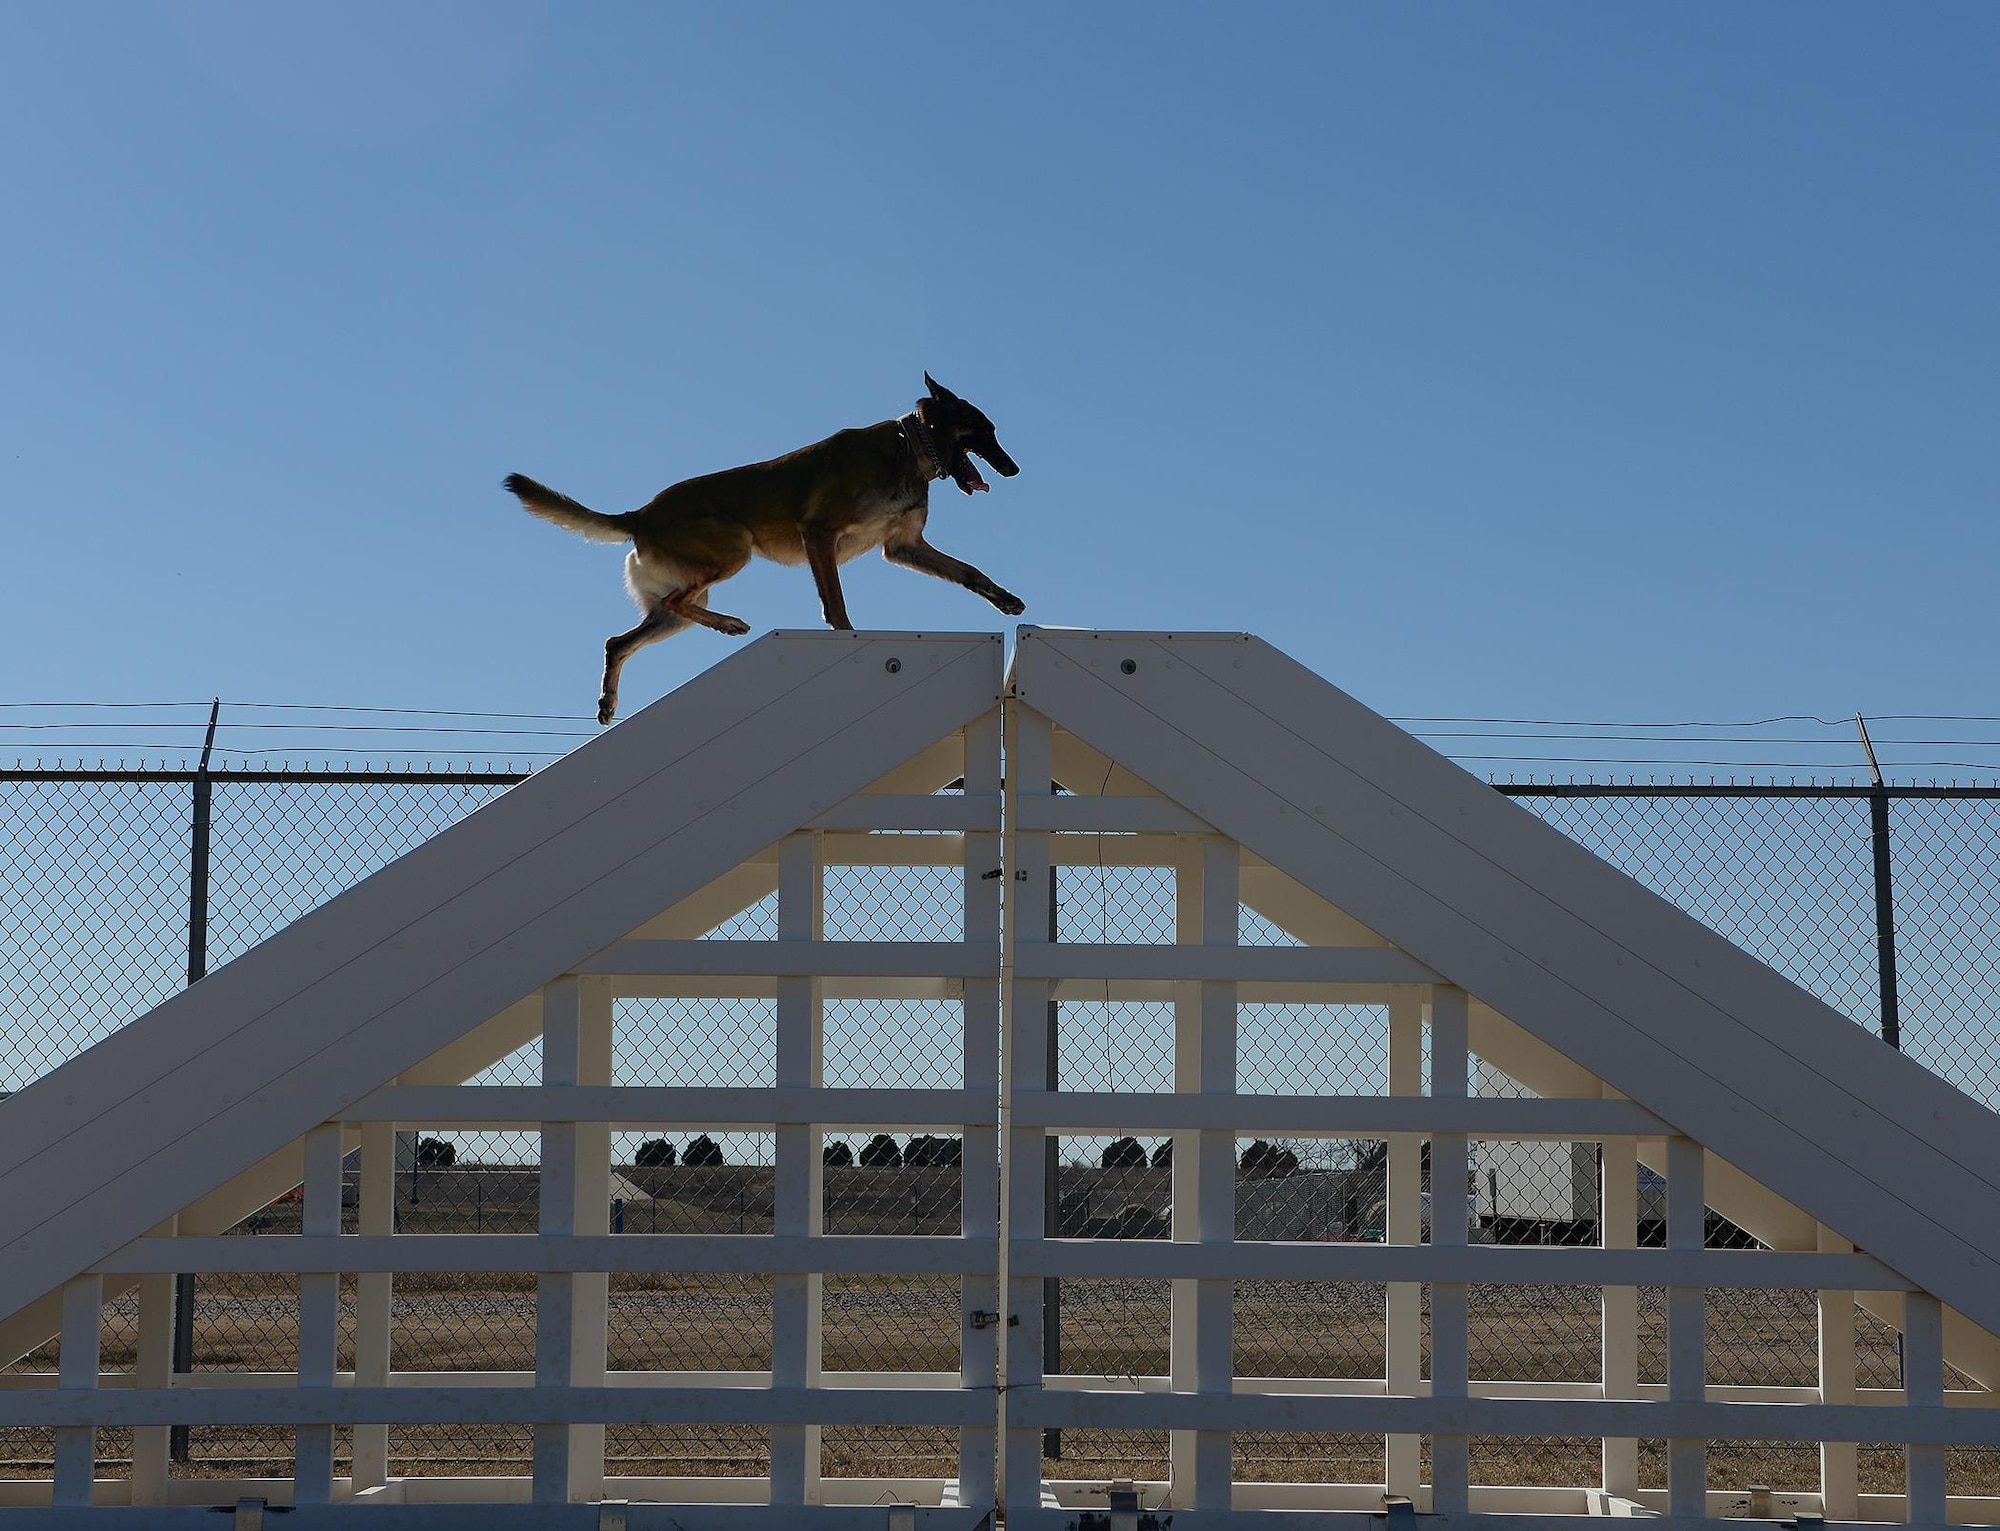 Yyoda, a U.S. Air Force military working dog, runs up and down steps during obstacle course training at Altus Air Force Base, Oklahoma, Feb. 10, 2015. Military working dogs get at least an hour of search time and training every day. (U.S. Air Force photo by Airman 1st Class Megan E. Acs)